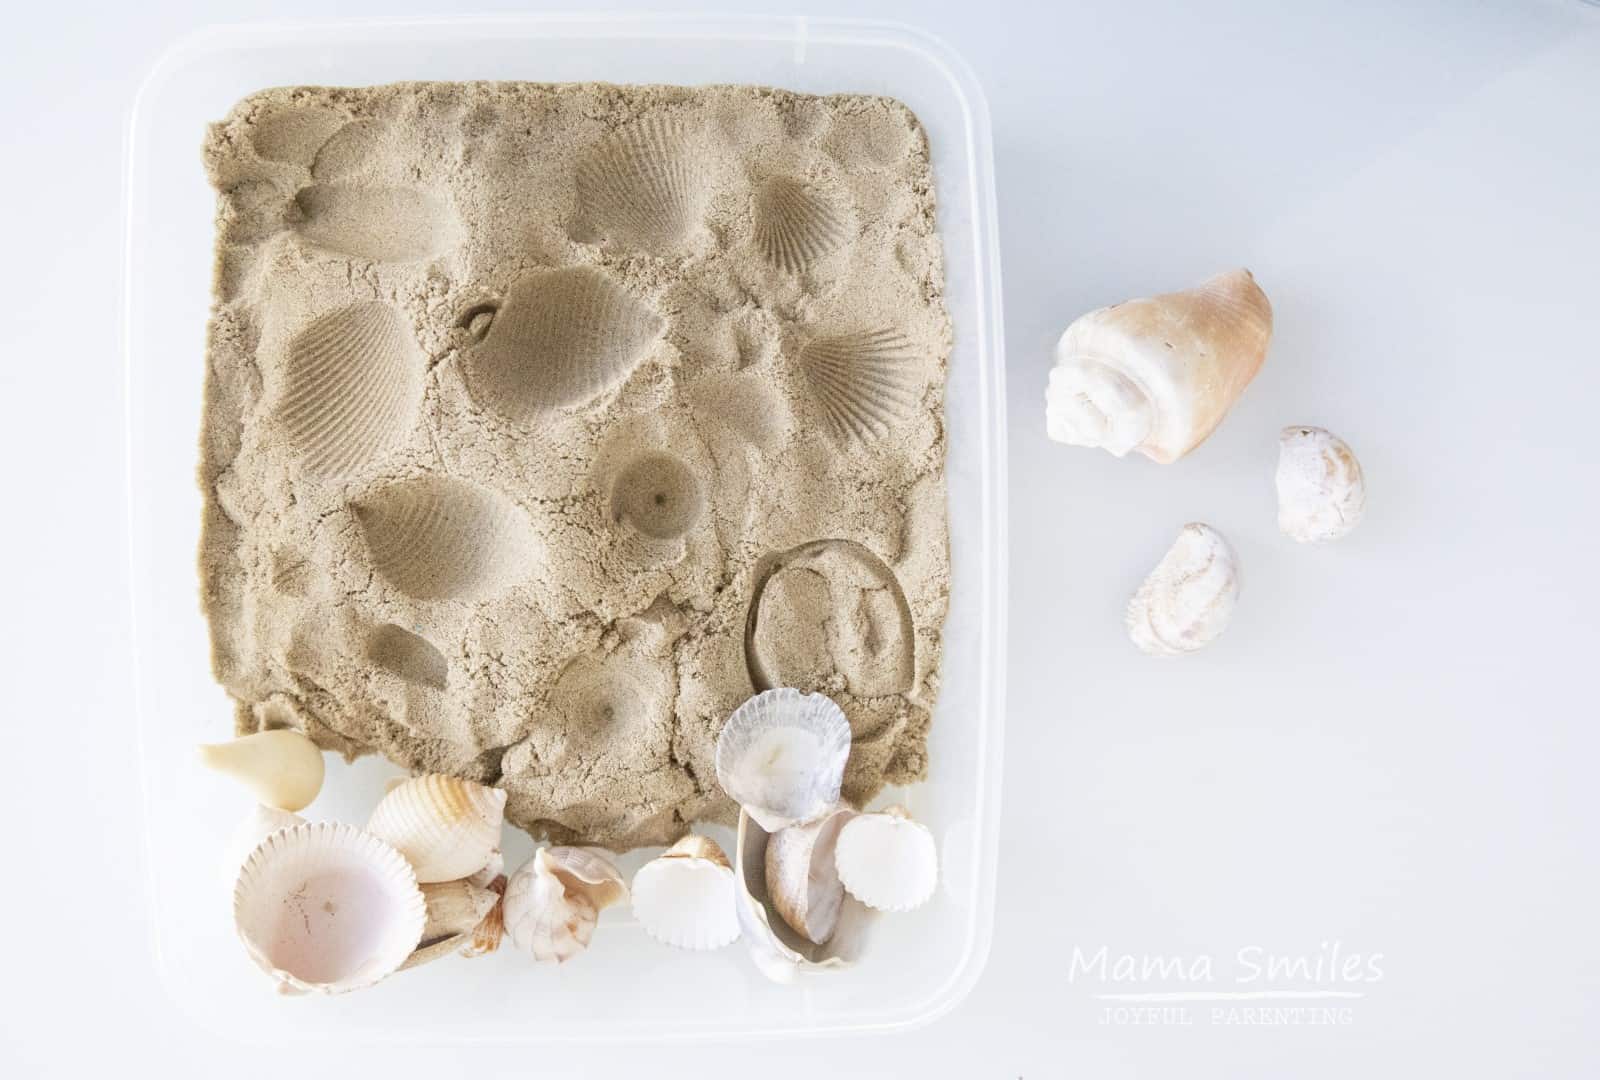 Explore shapes and textures with a simple sea shell sensory bin